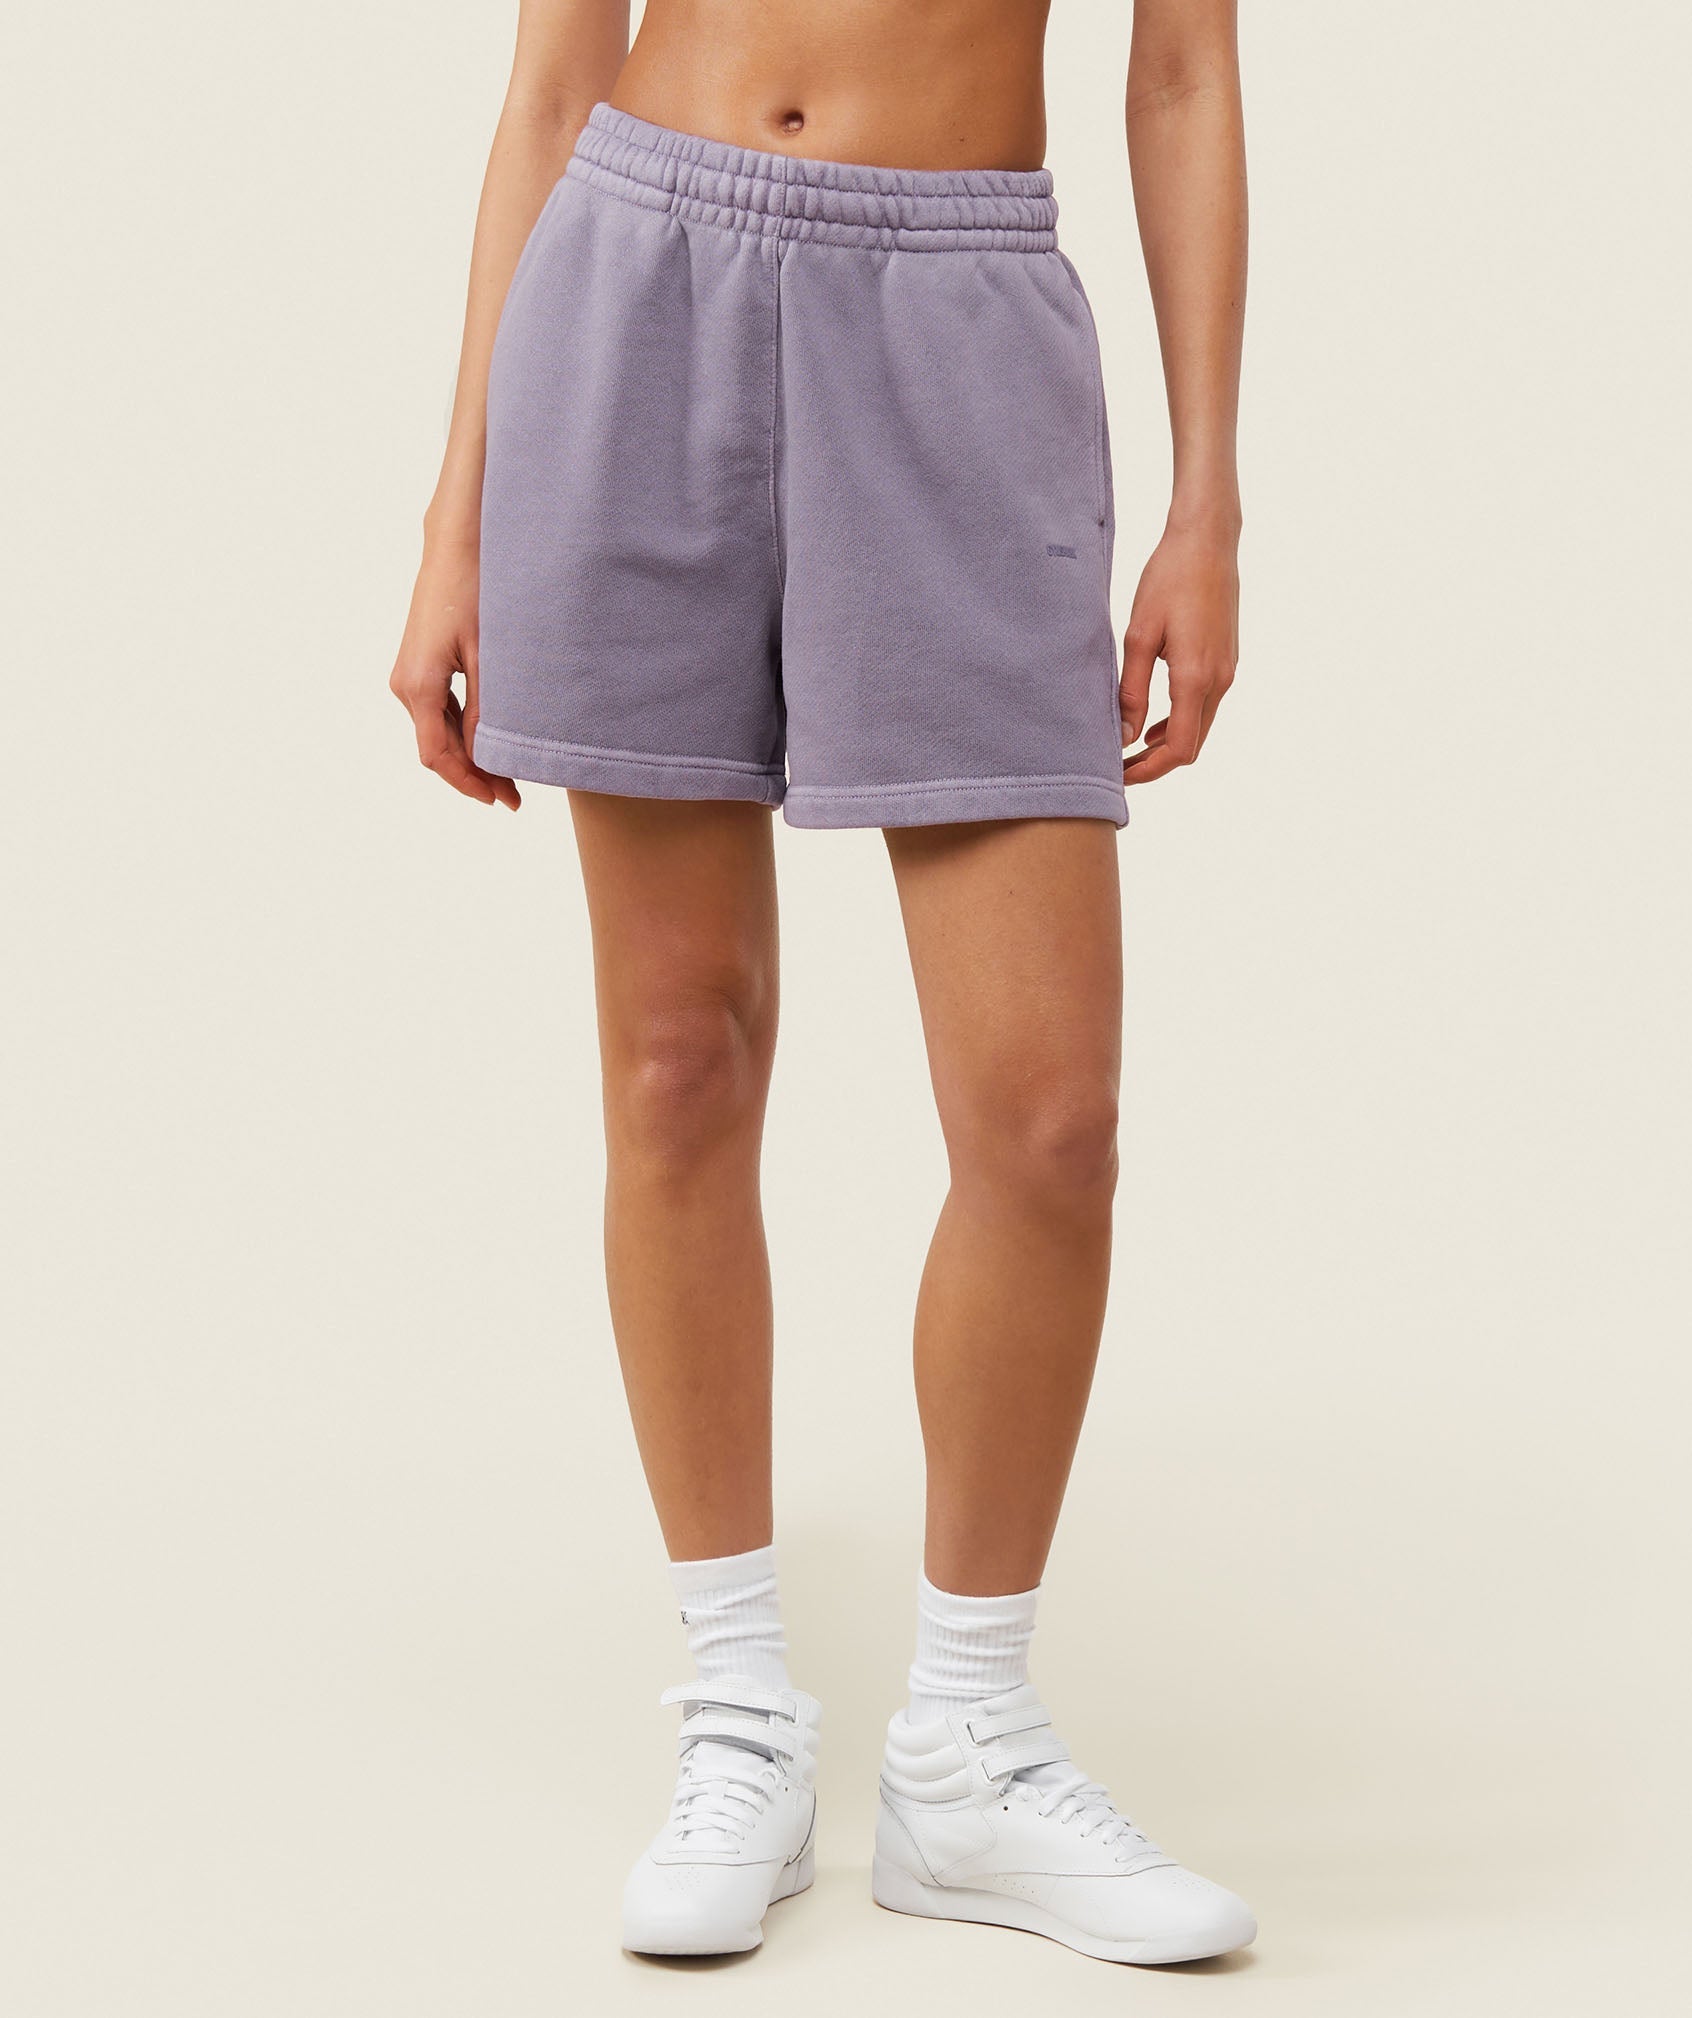 everywear Relaxed Sweat Shorts